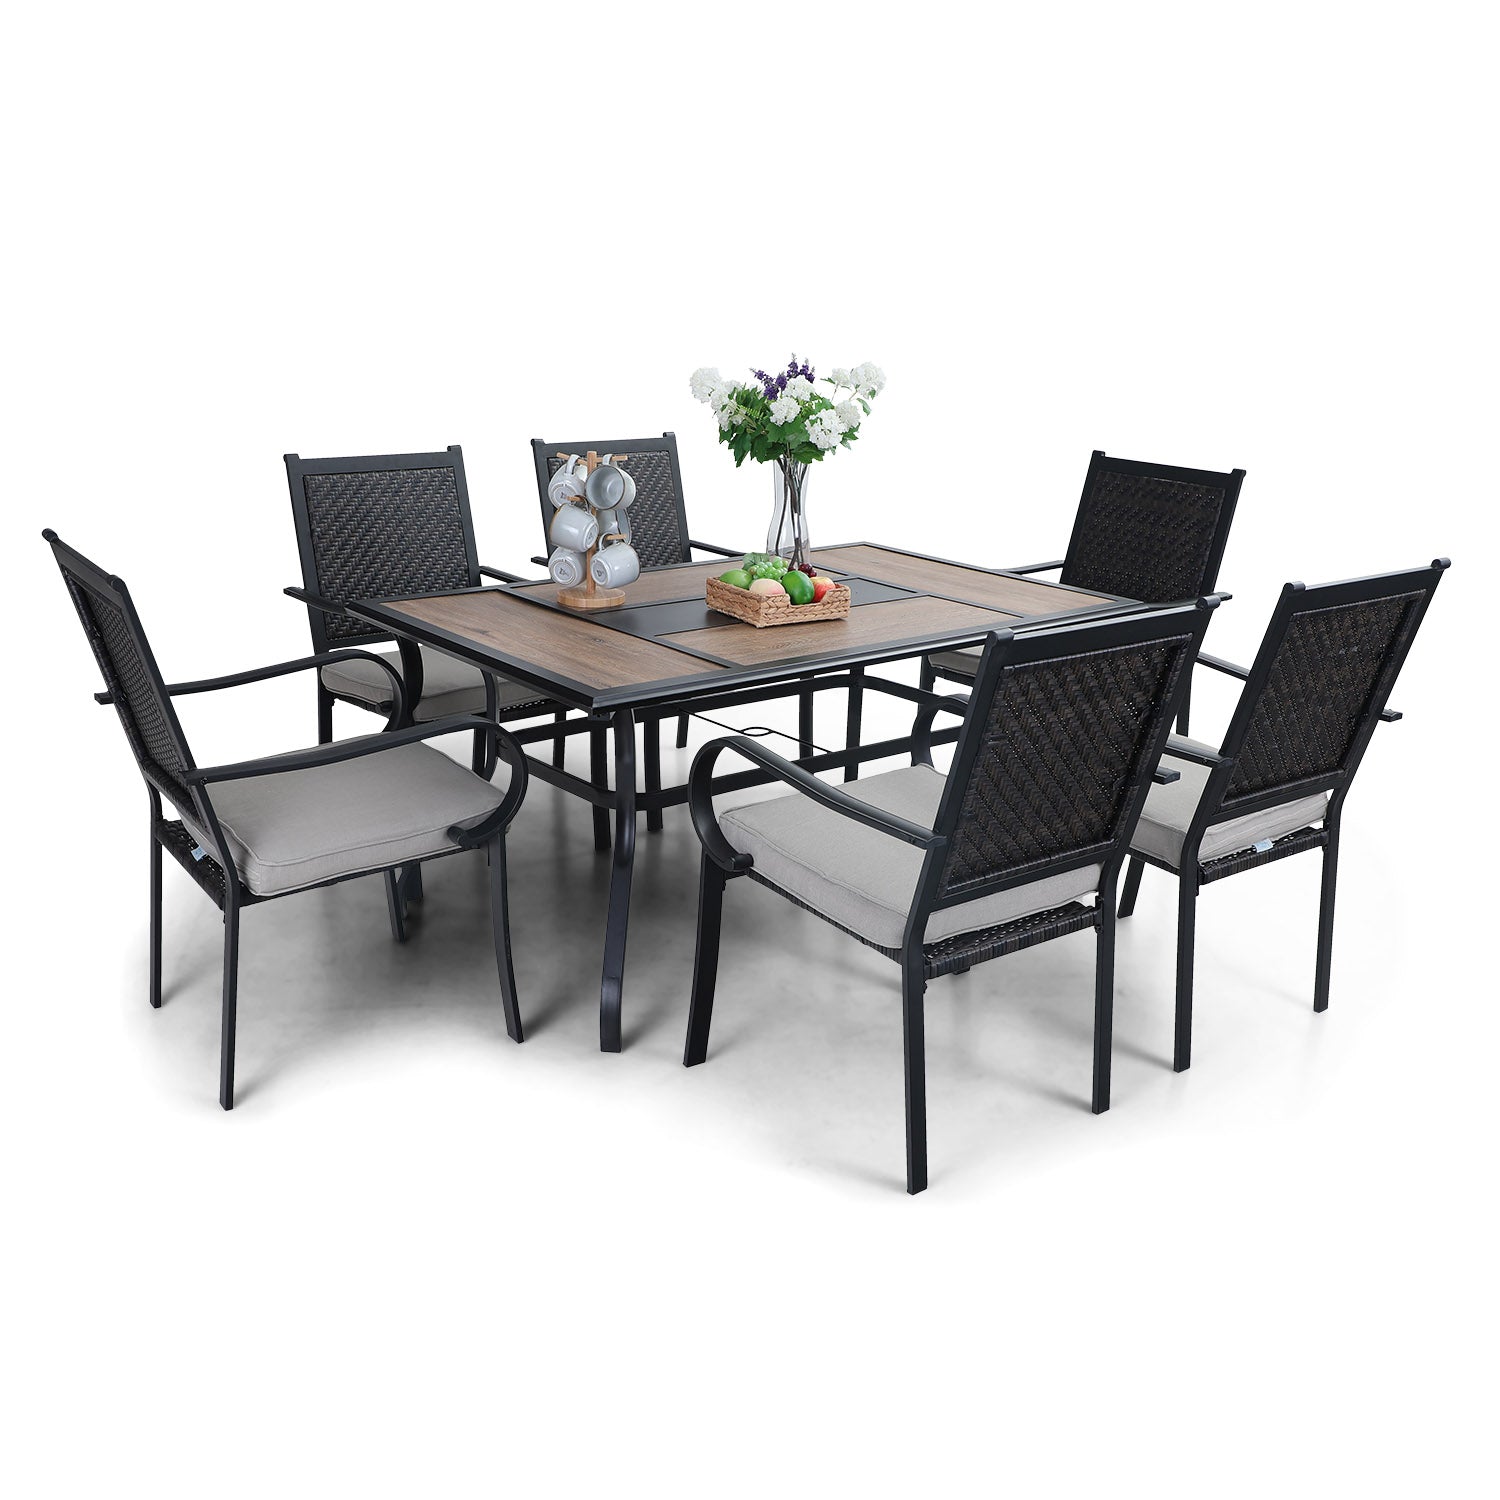 PHI VILLA 7-Piece Rattan Dining Chairs & Geometric Table Outdoor Dining Set